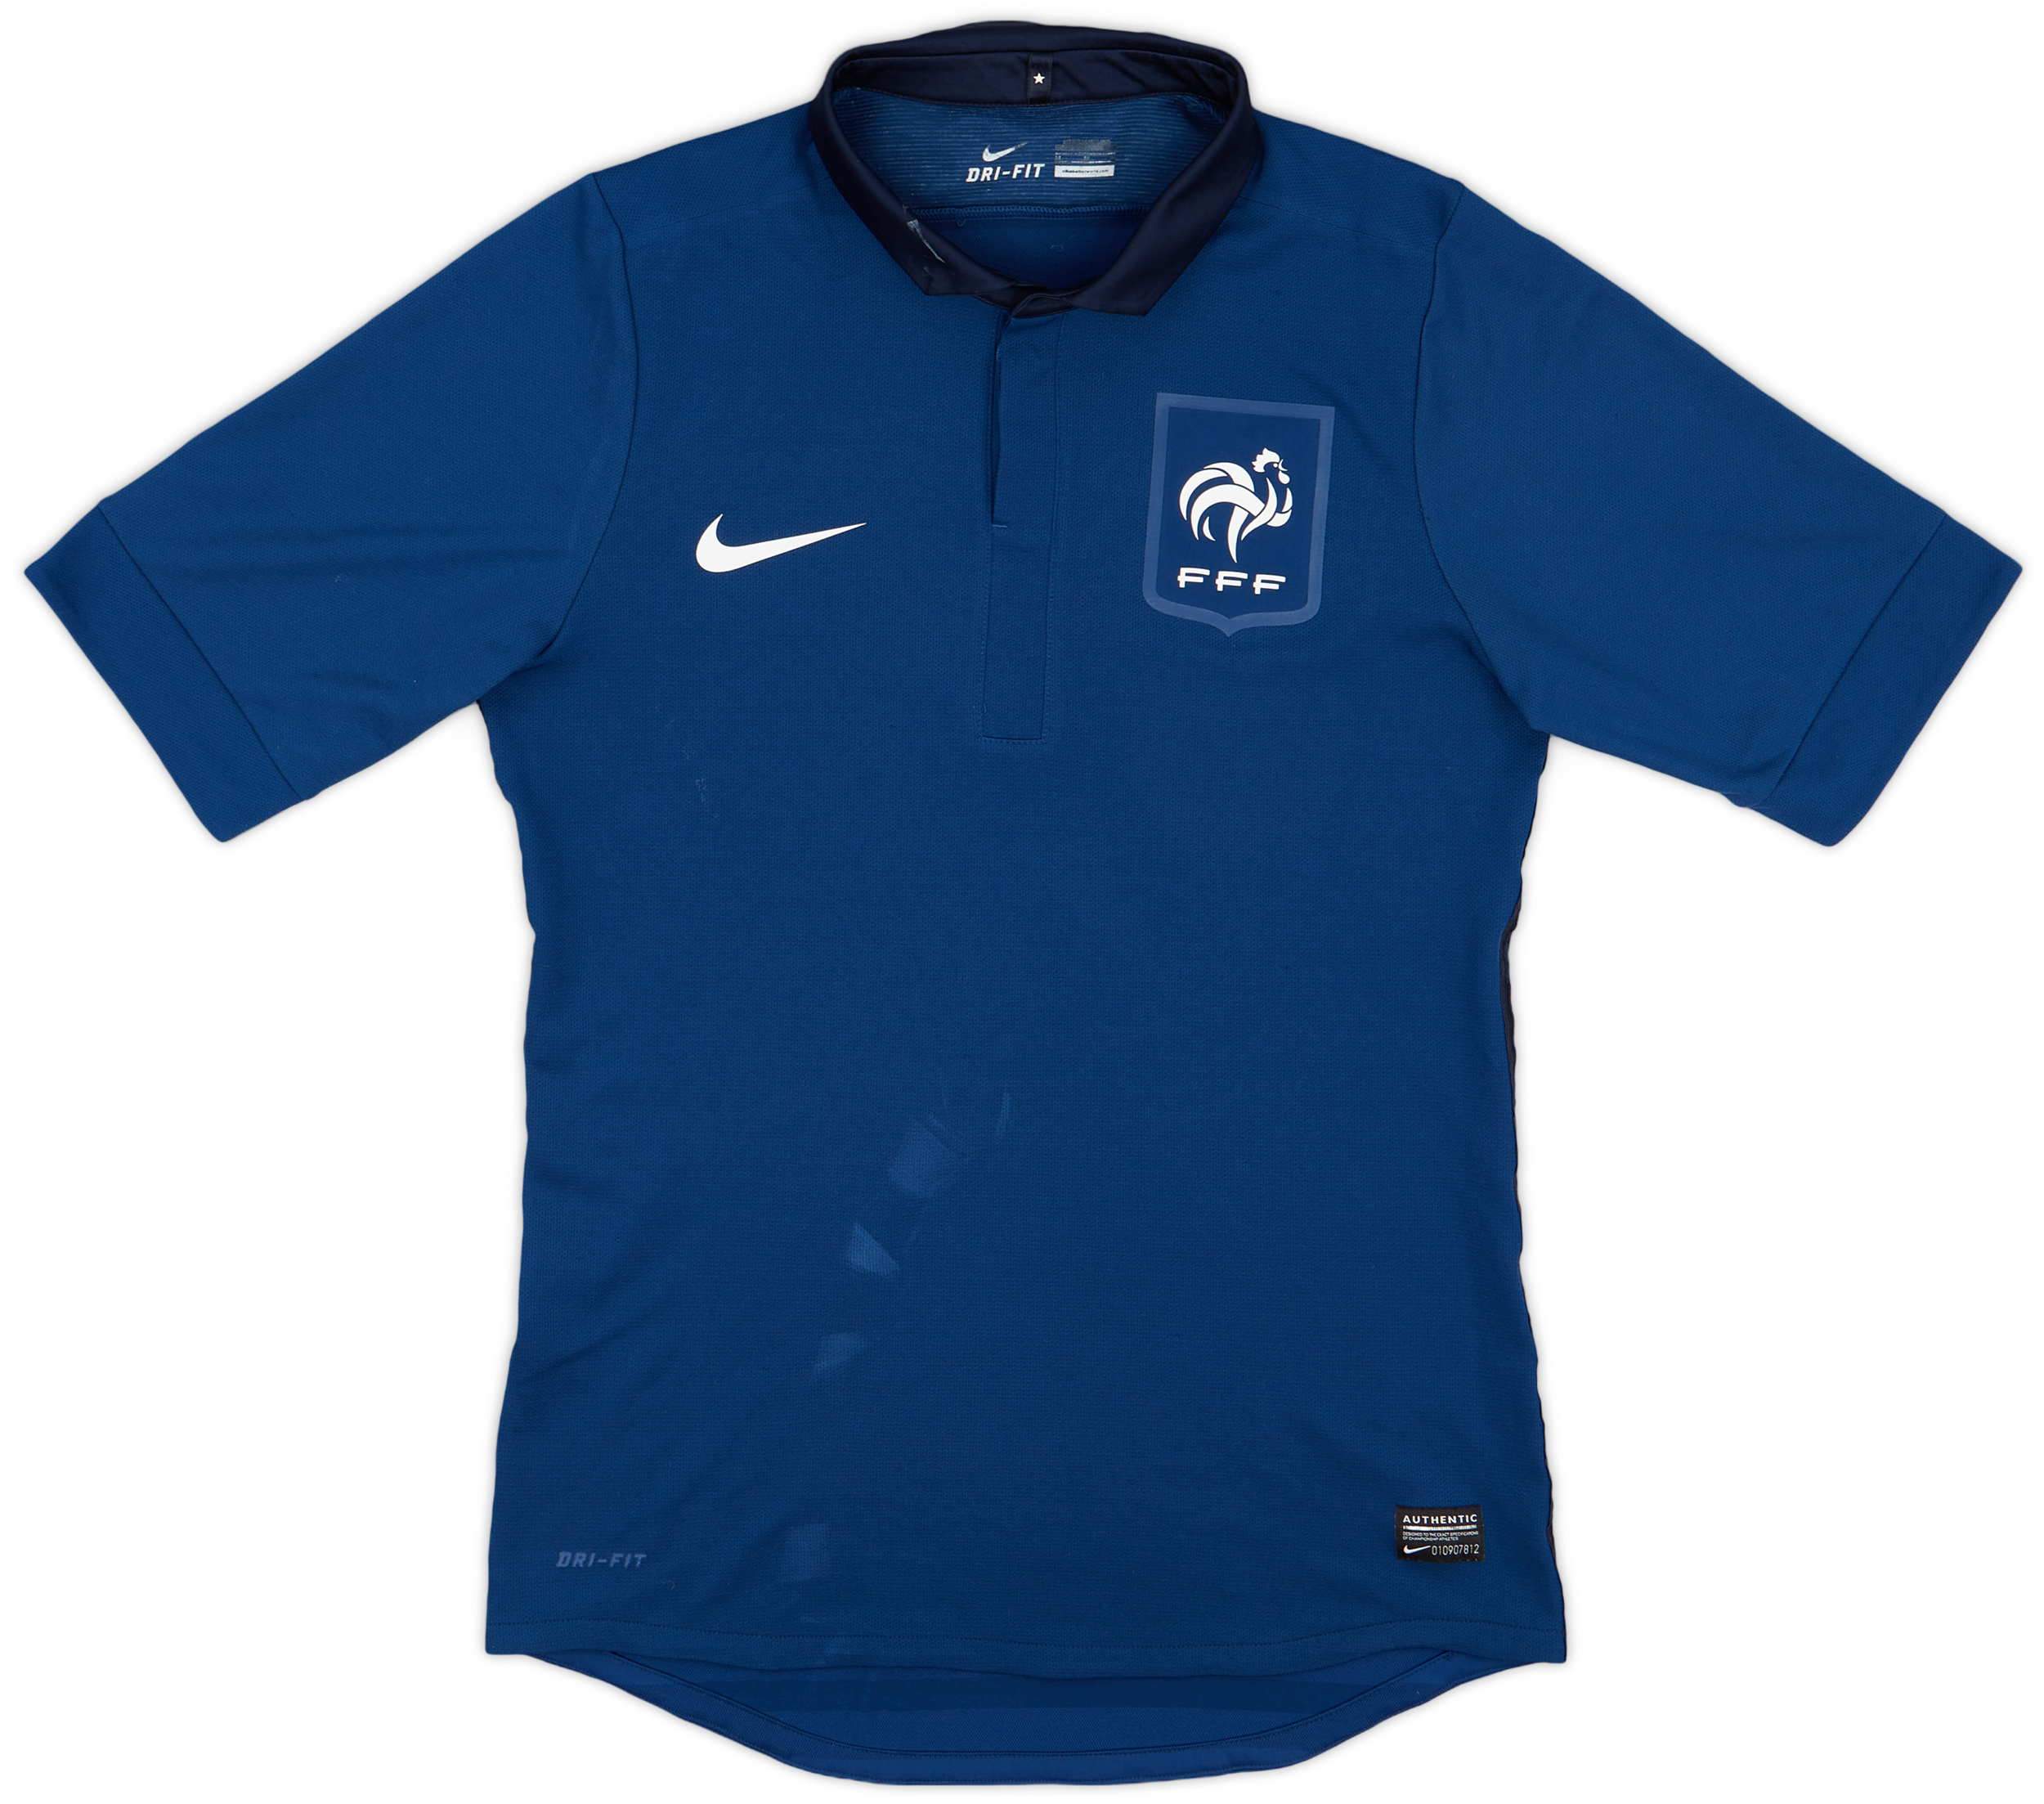 2011-12 France Authentic Home Shirt - 5/10 - ()